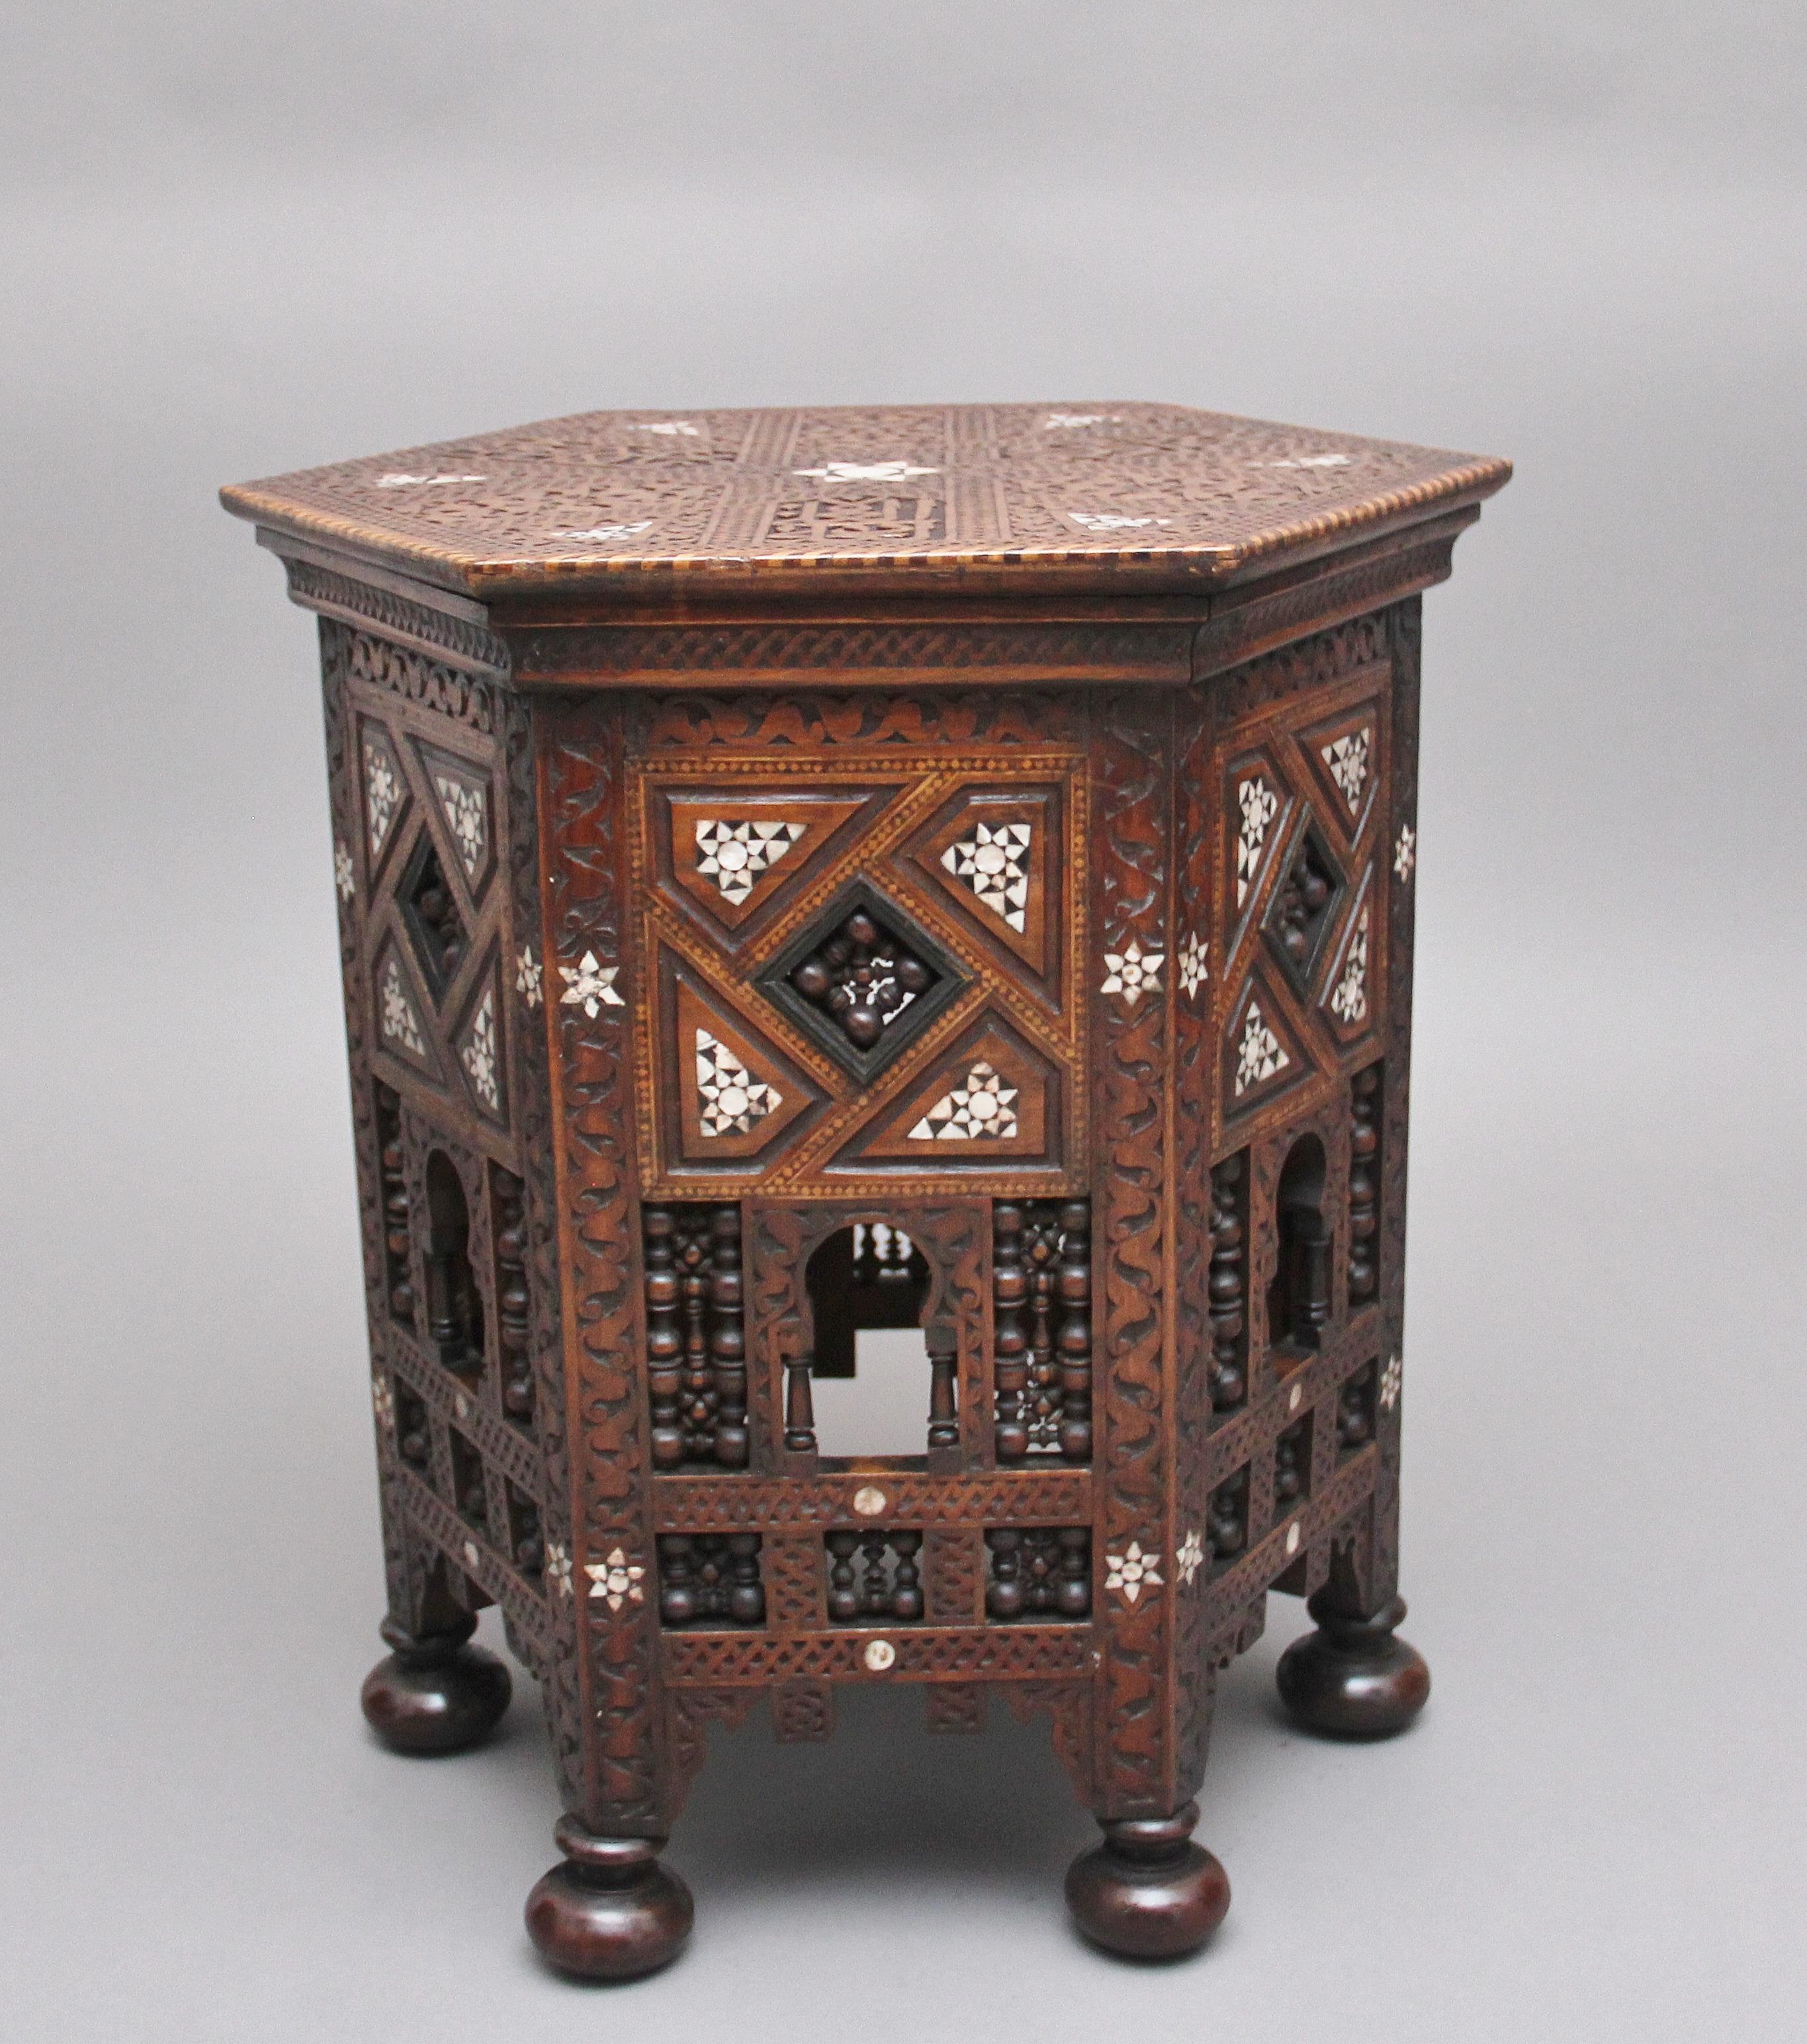 A highly decorative 19th century Moorish occasional table by Liberty & Co, the hexagon shaped top with carved Moorish design with star decoration at the centre, the edge of the top having chequered decoration, each side of the table is in keeping